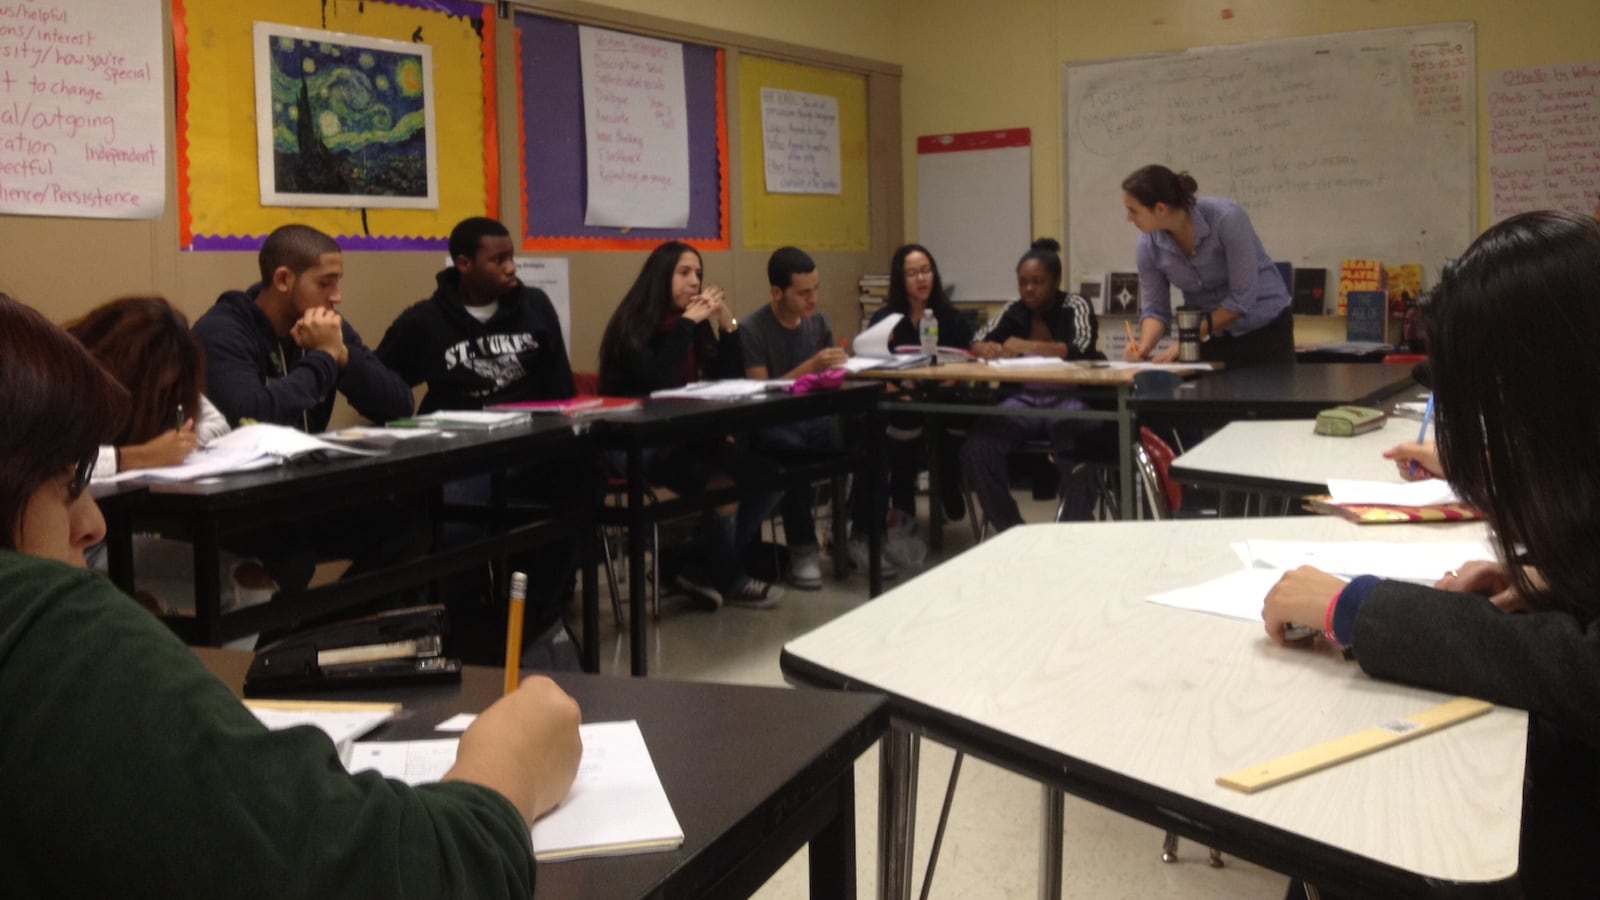 Joanna Dolgin's "Tragedy" class at East Side Community School focused on Shakespeare's Othello in December 2012.